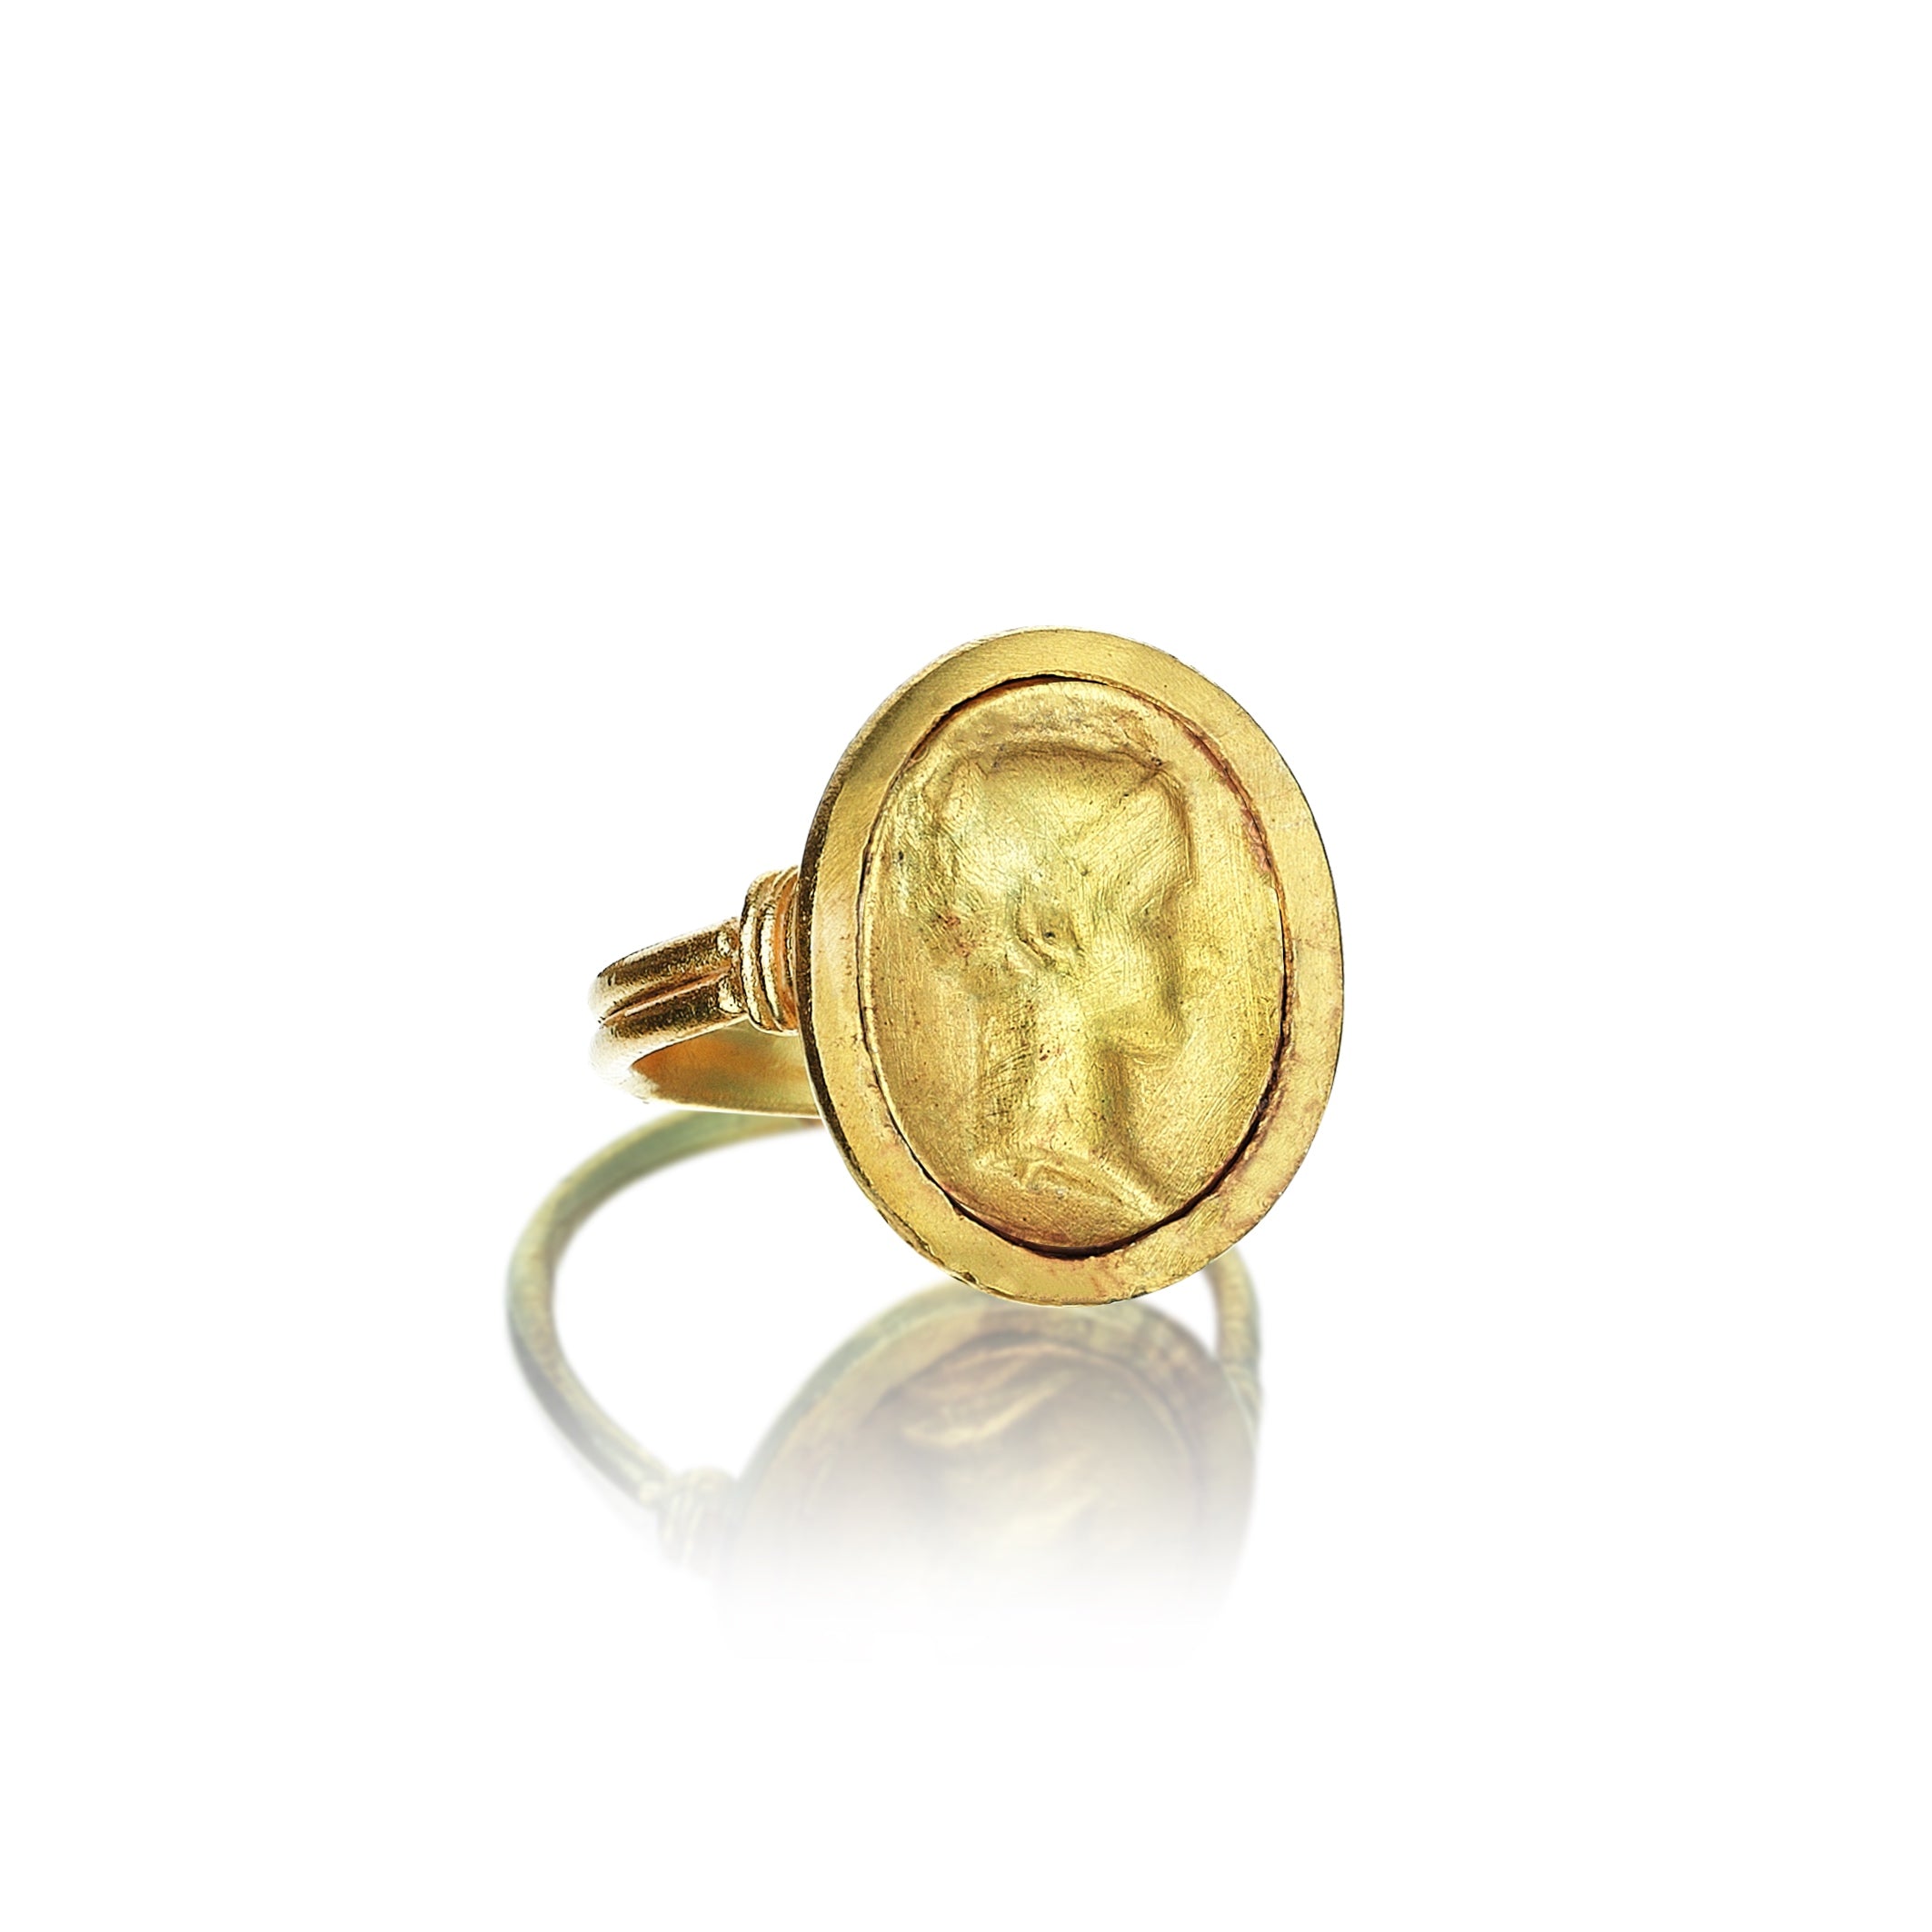 The Cameo Ring